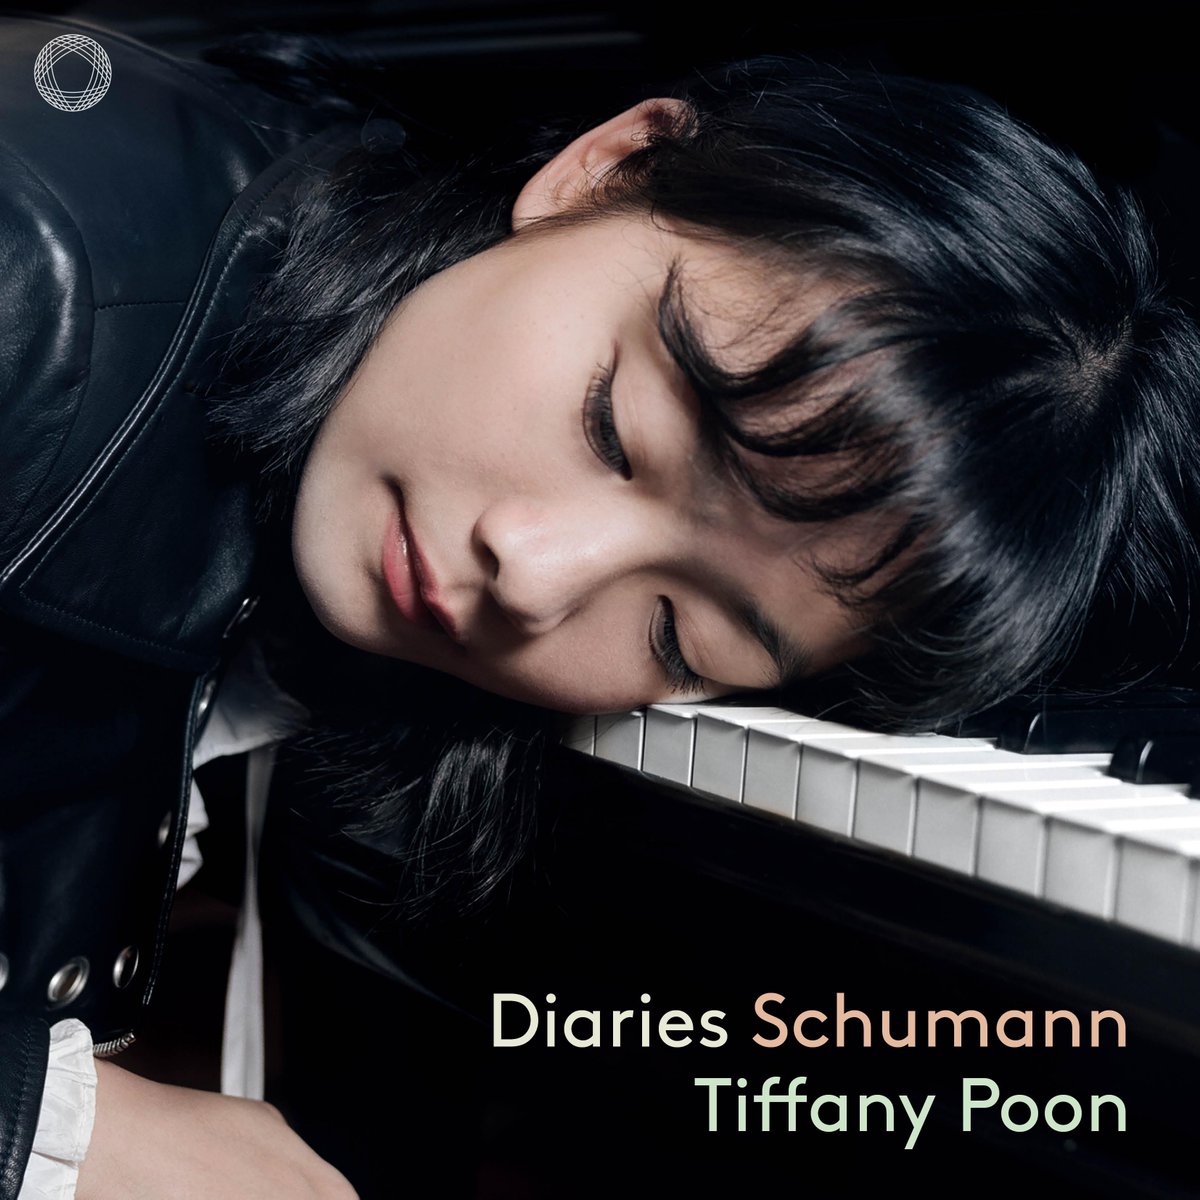 .@Tiffanypianist has made the cover of @amazonmusic’s Fresh Classical playlist!🎶 LISTEN to the latest tracks from the forthcoming album ‘Diaries: Schumann’ & DISCOVER the playlist here: 🎧bit.ly/3OeBElf